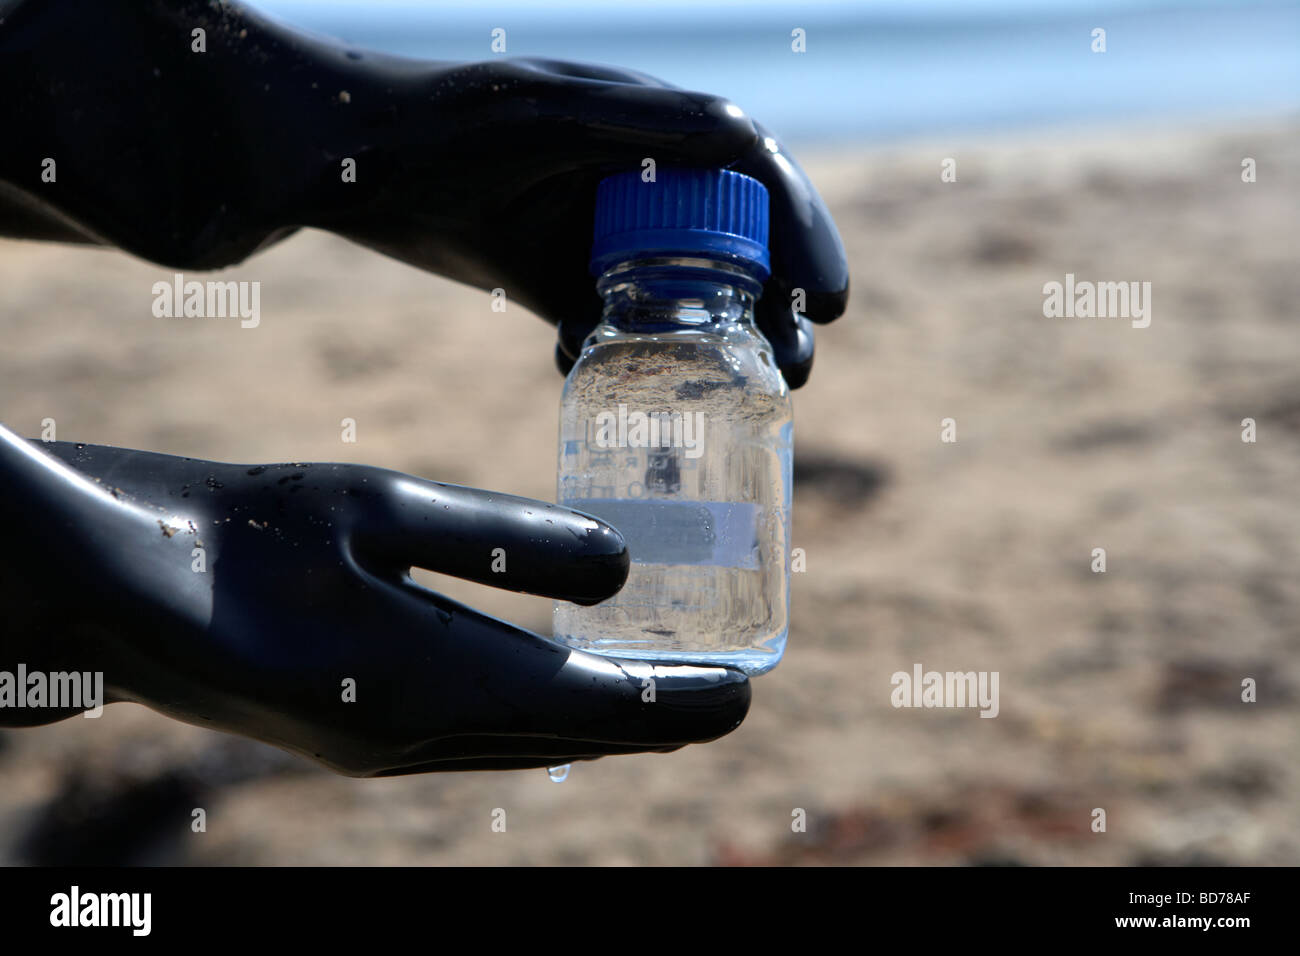 northern ireland environment service operative sampling water from local beach to assess water quality standards in the uk Stock Photo